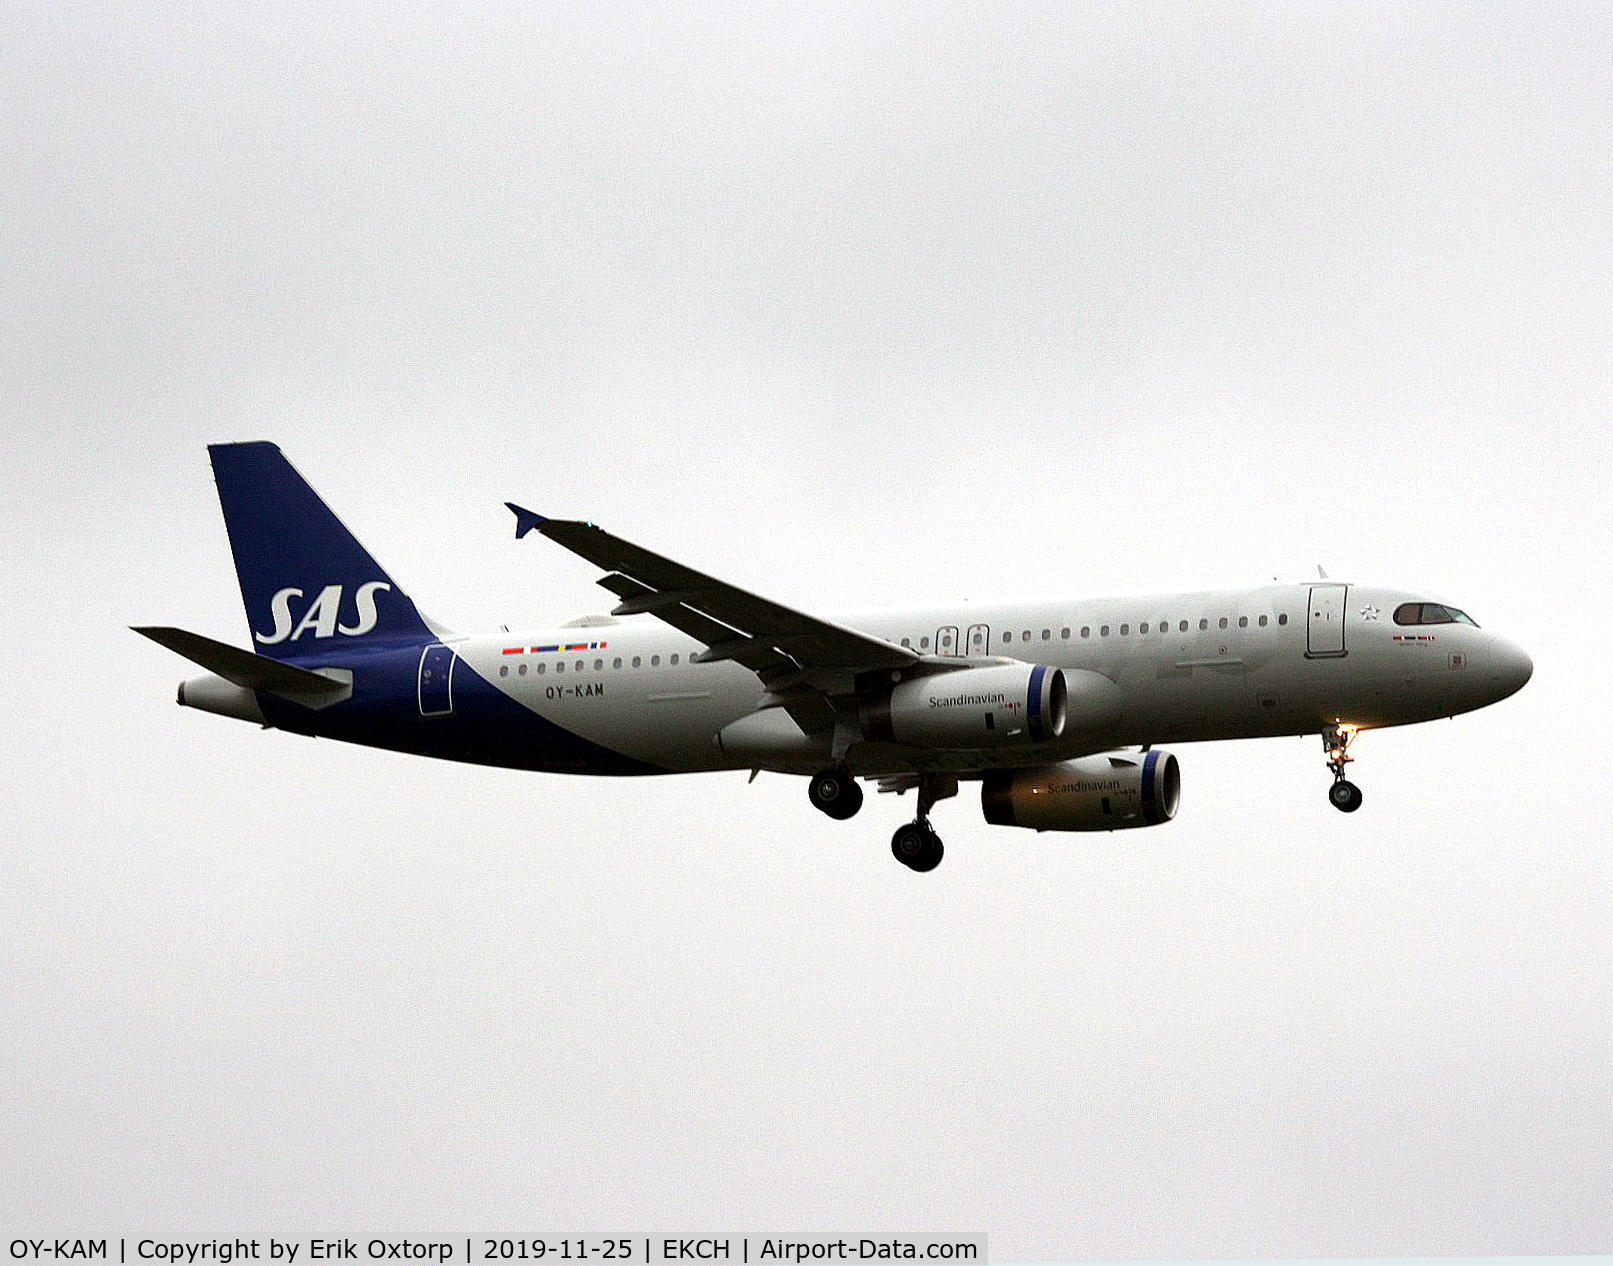 OY-KAM, 2006 Airbus A320-232 C/N 2911, OY.KAM now painted in the new SAS design